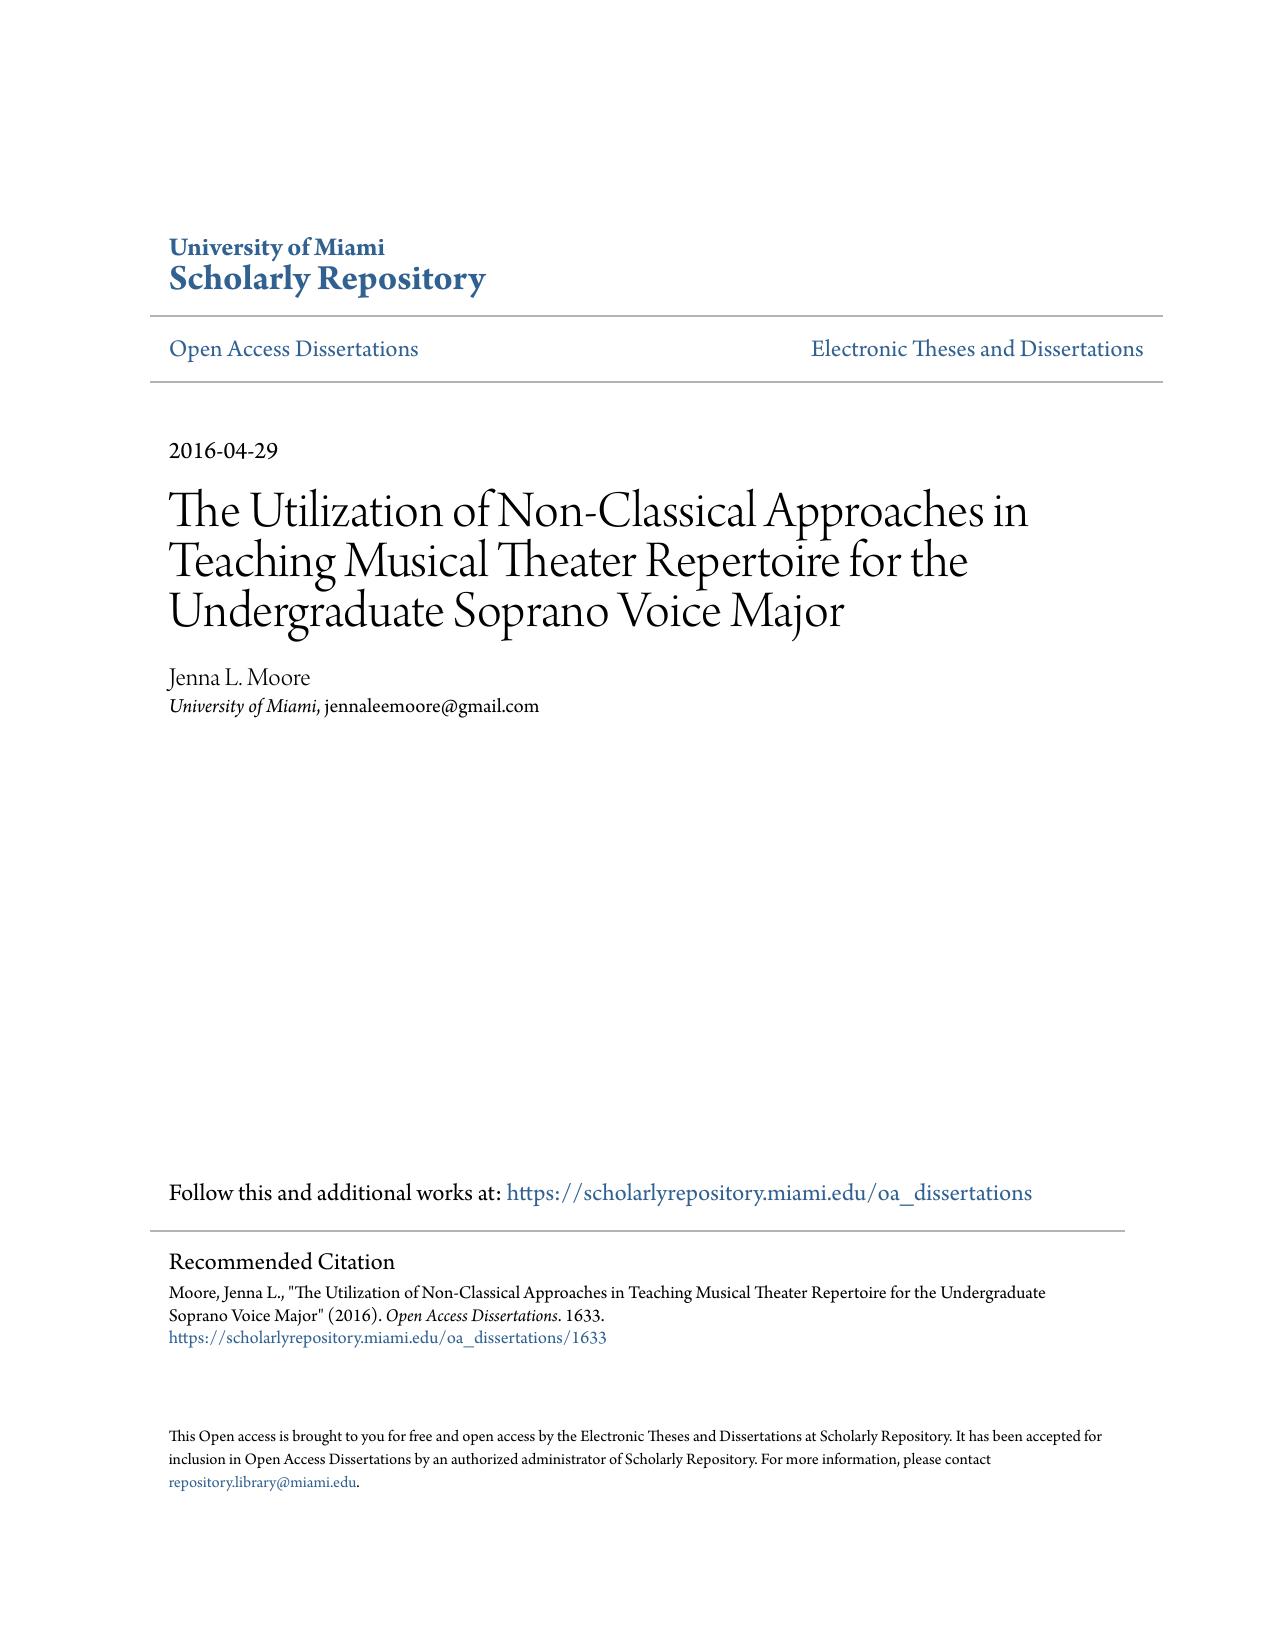 The Utilization of Non-Classical Approaches in Teaching  Musical Theater Repertoire for the Undergraduate Soprano Voice Major